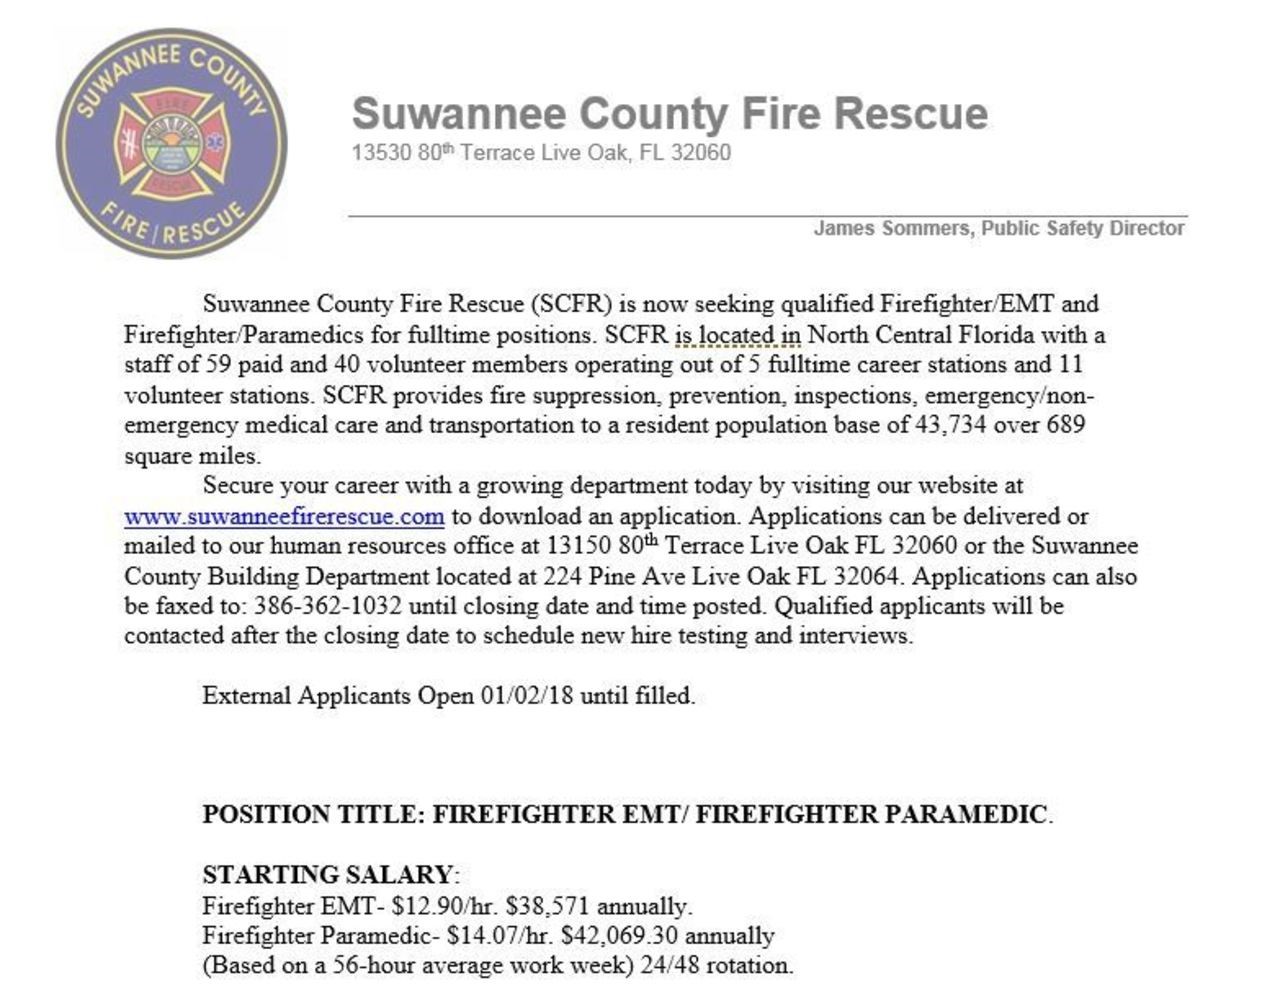 Suwannee County Fire Rescue Hiring FF/EMT and FF/Paramedic